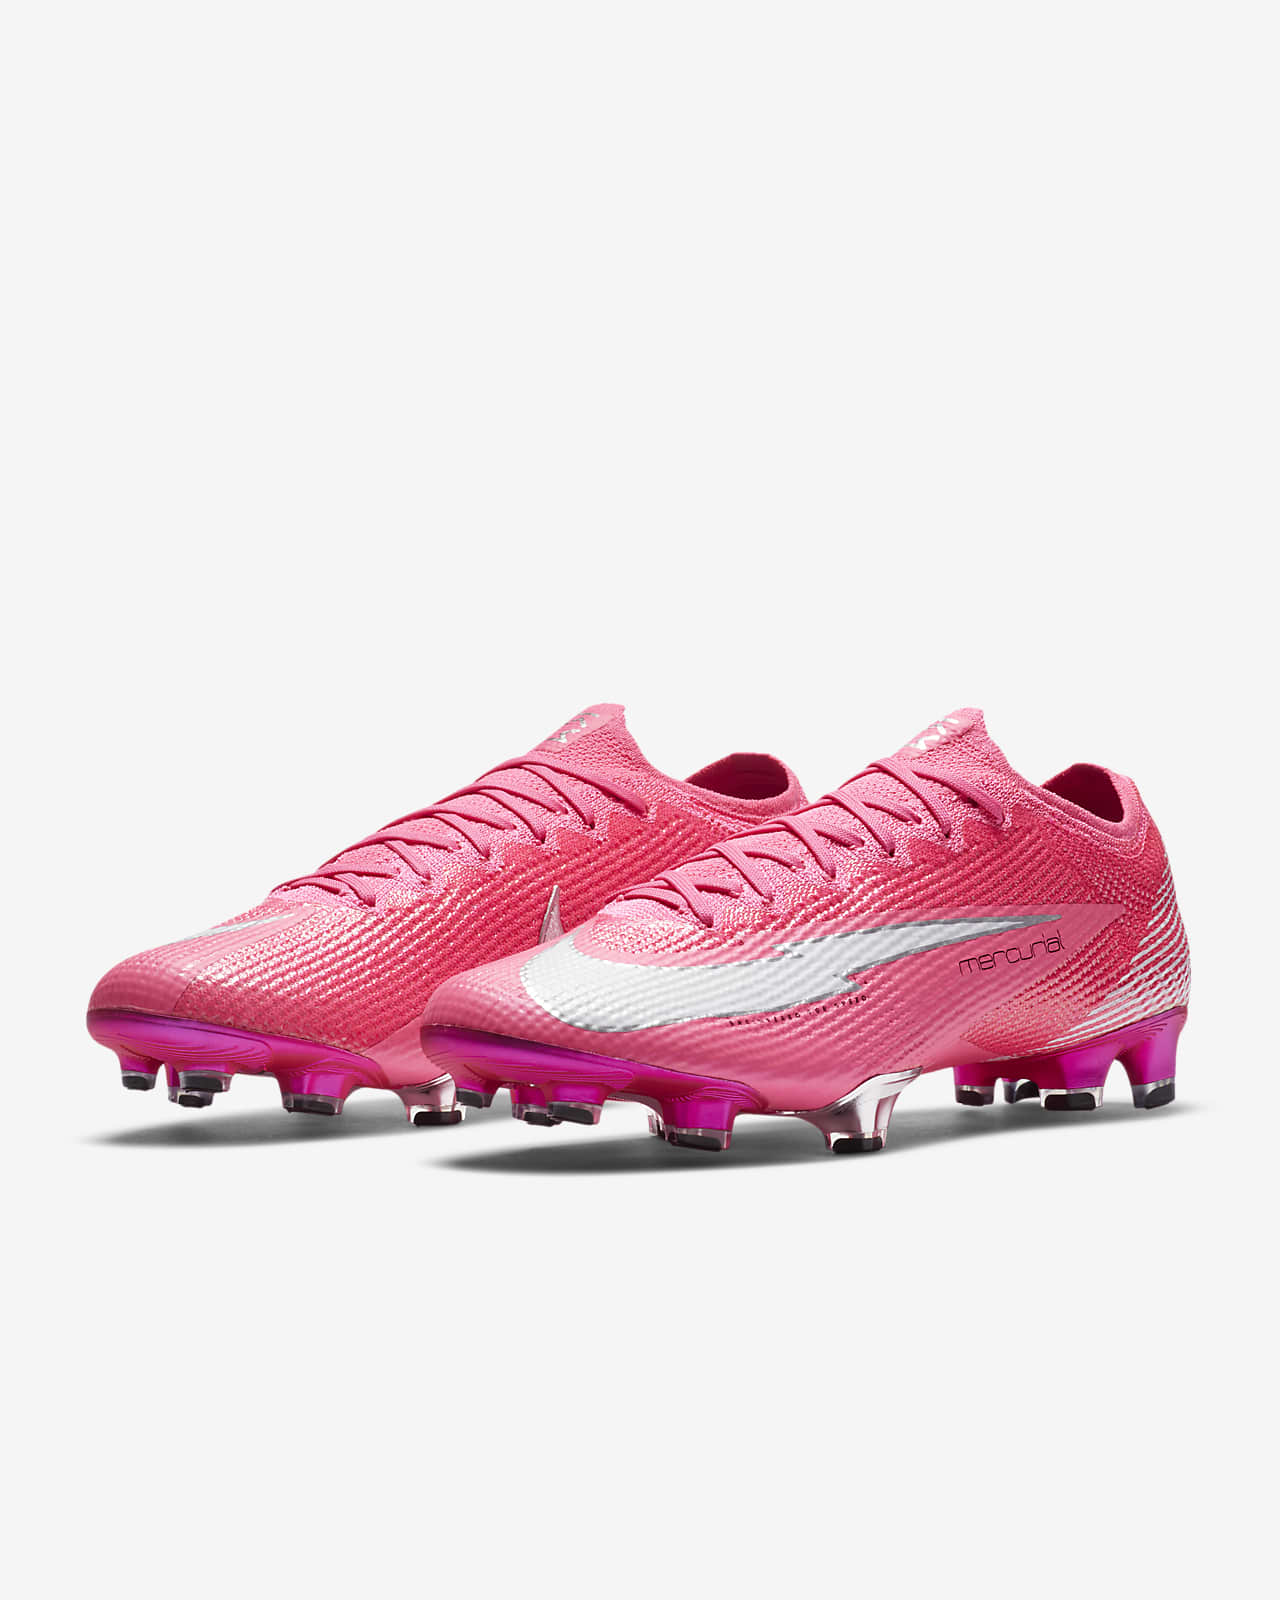 pink mercurial boots